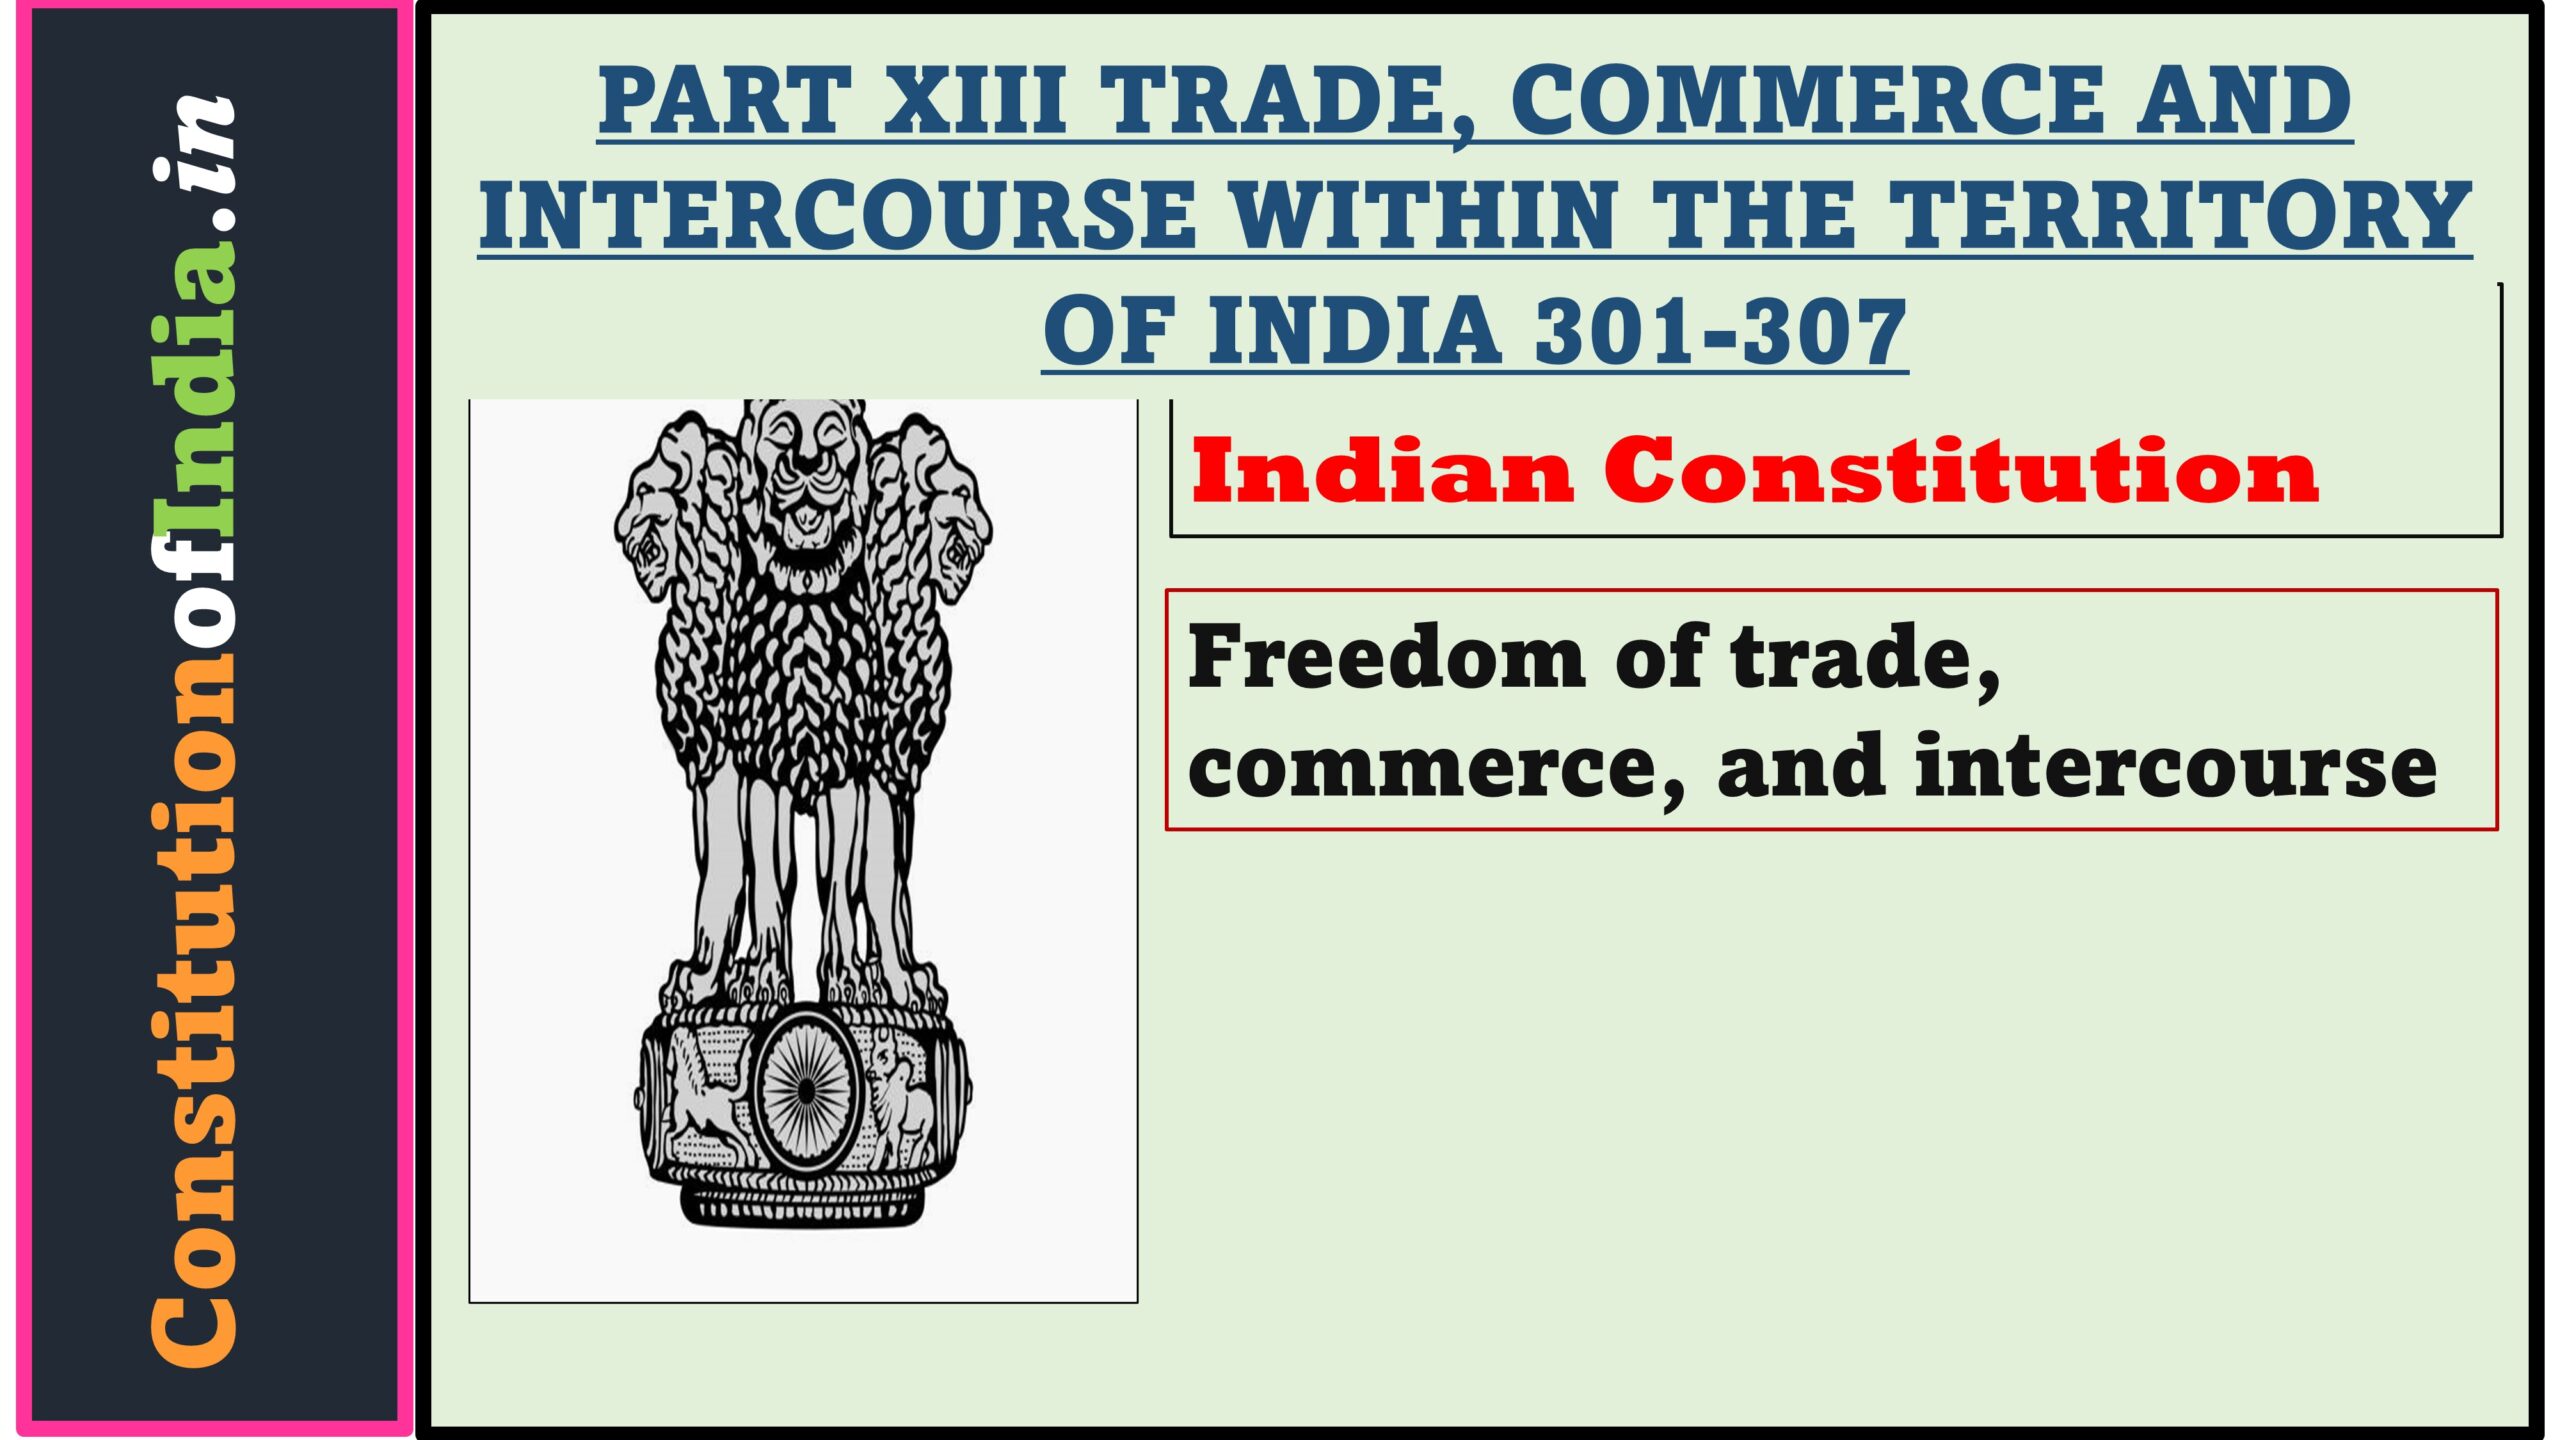 Article 301 of The Indian Constitution